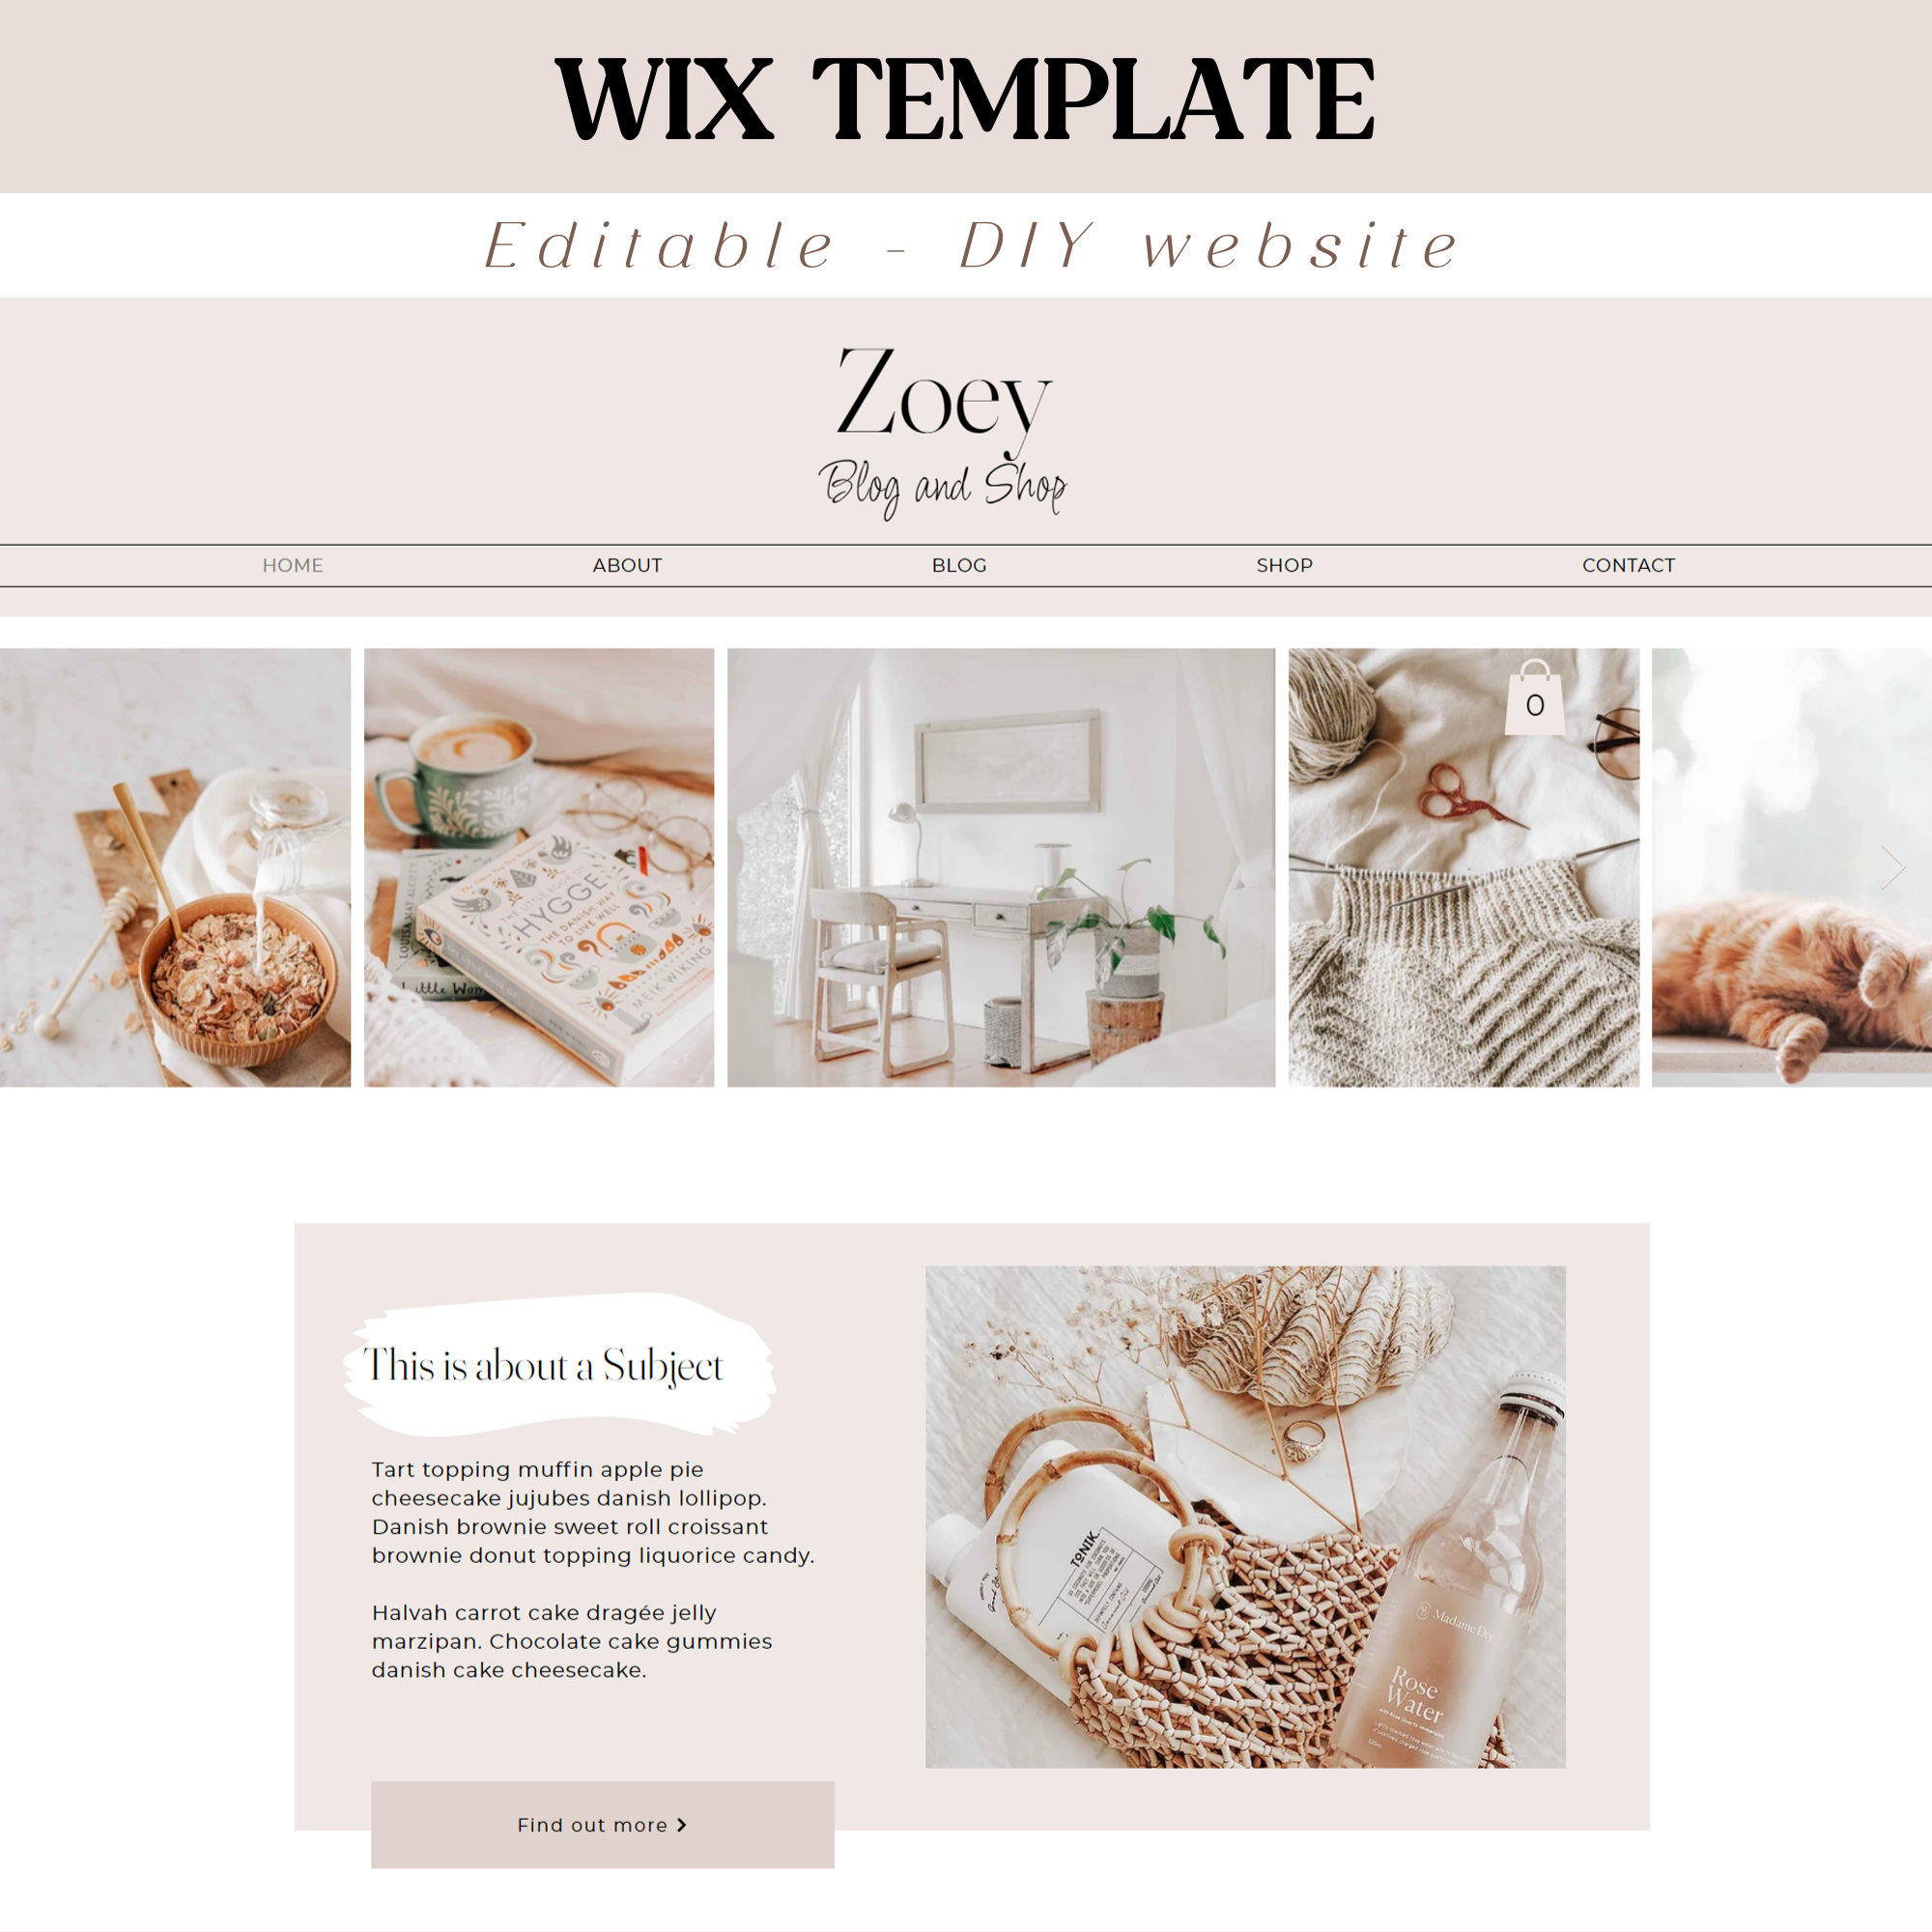 Wix Artist Portfolio Website Template Website Template for Artist Portfolio  E-commerce Minimalist, Edgy and Simple Wix Store Template 